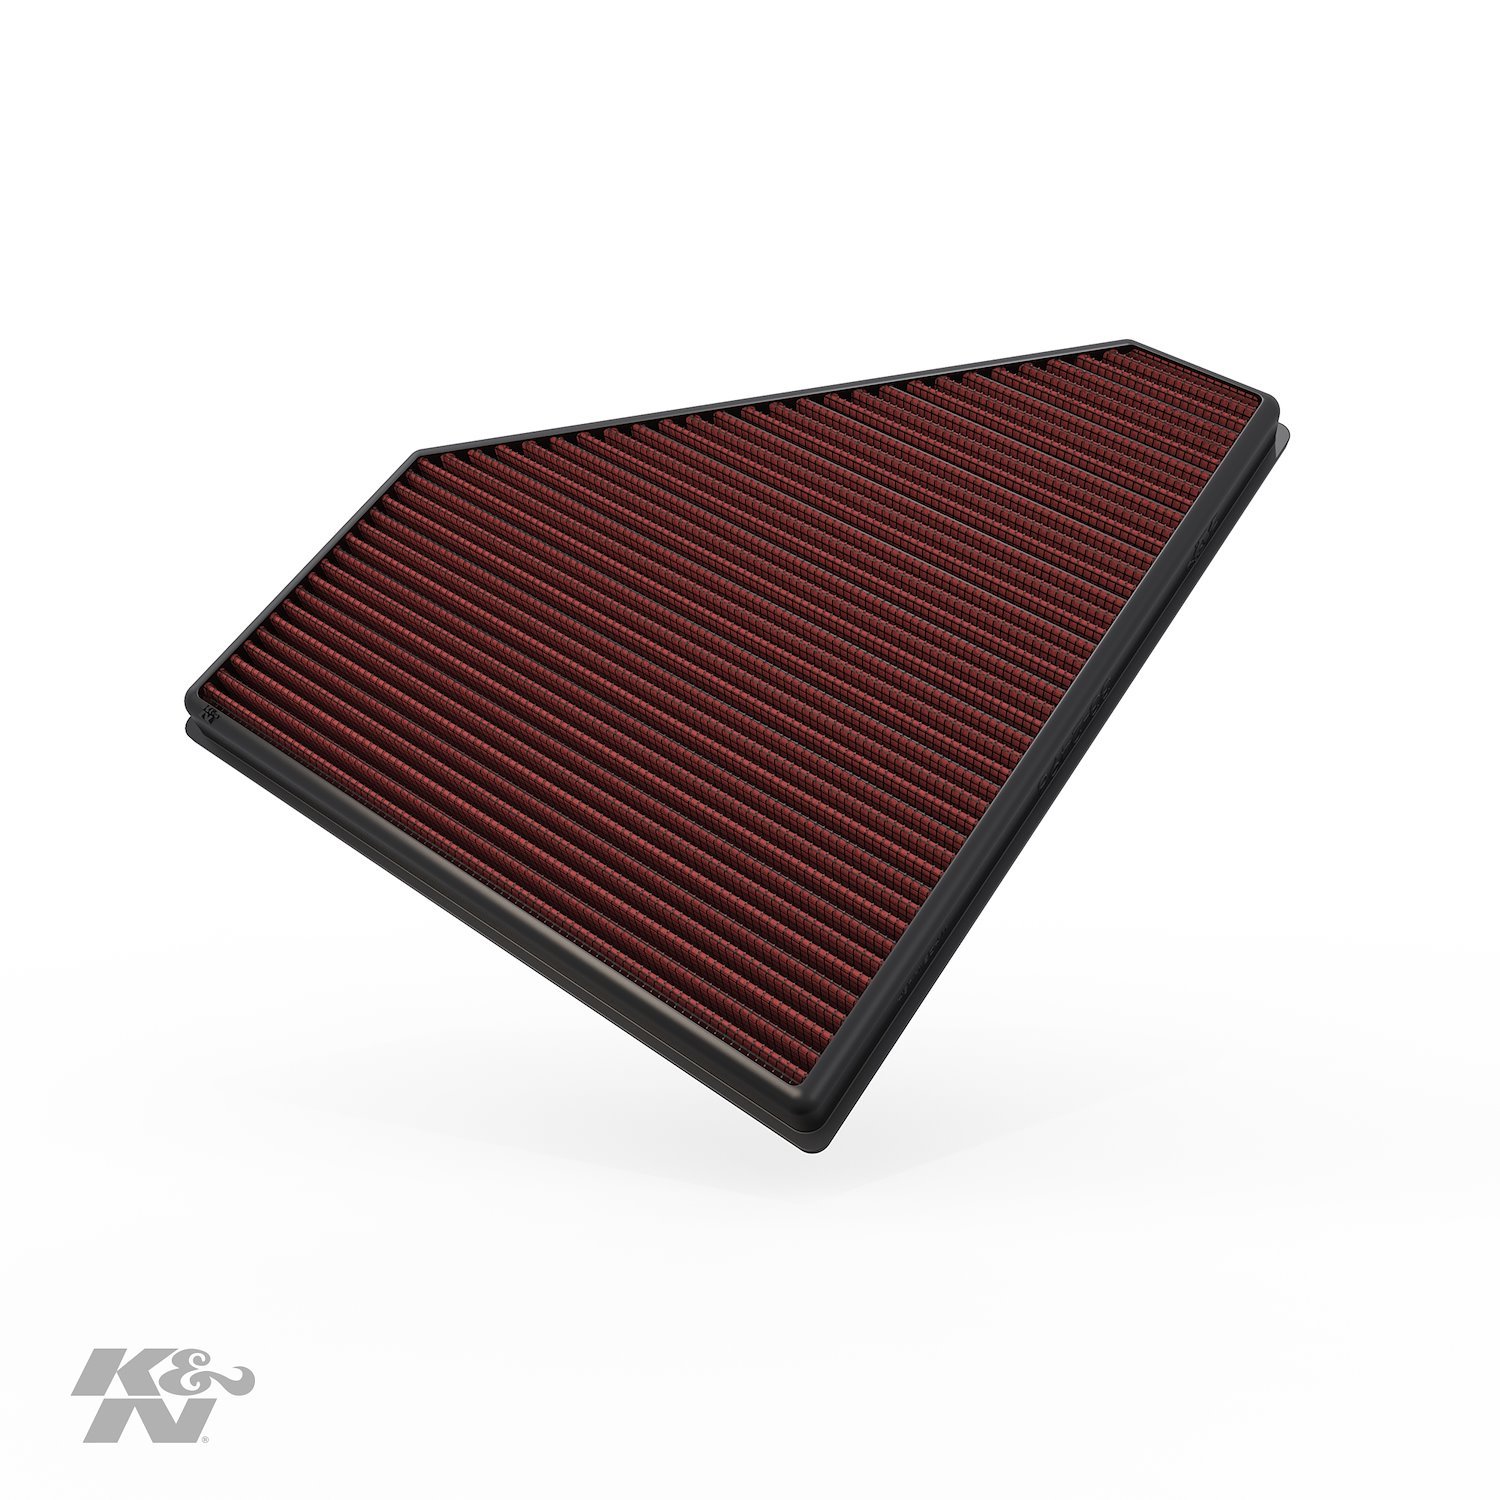 Cadillac ATS/CTS and Chevrolet Camaro High Performance OE-Replacement Air Filter